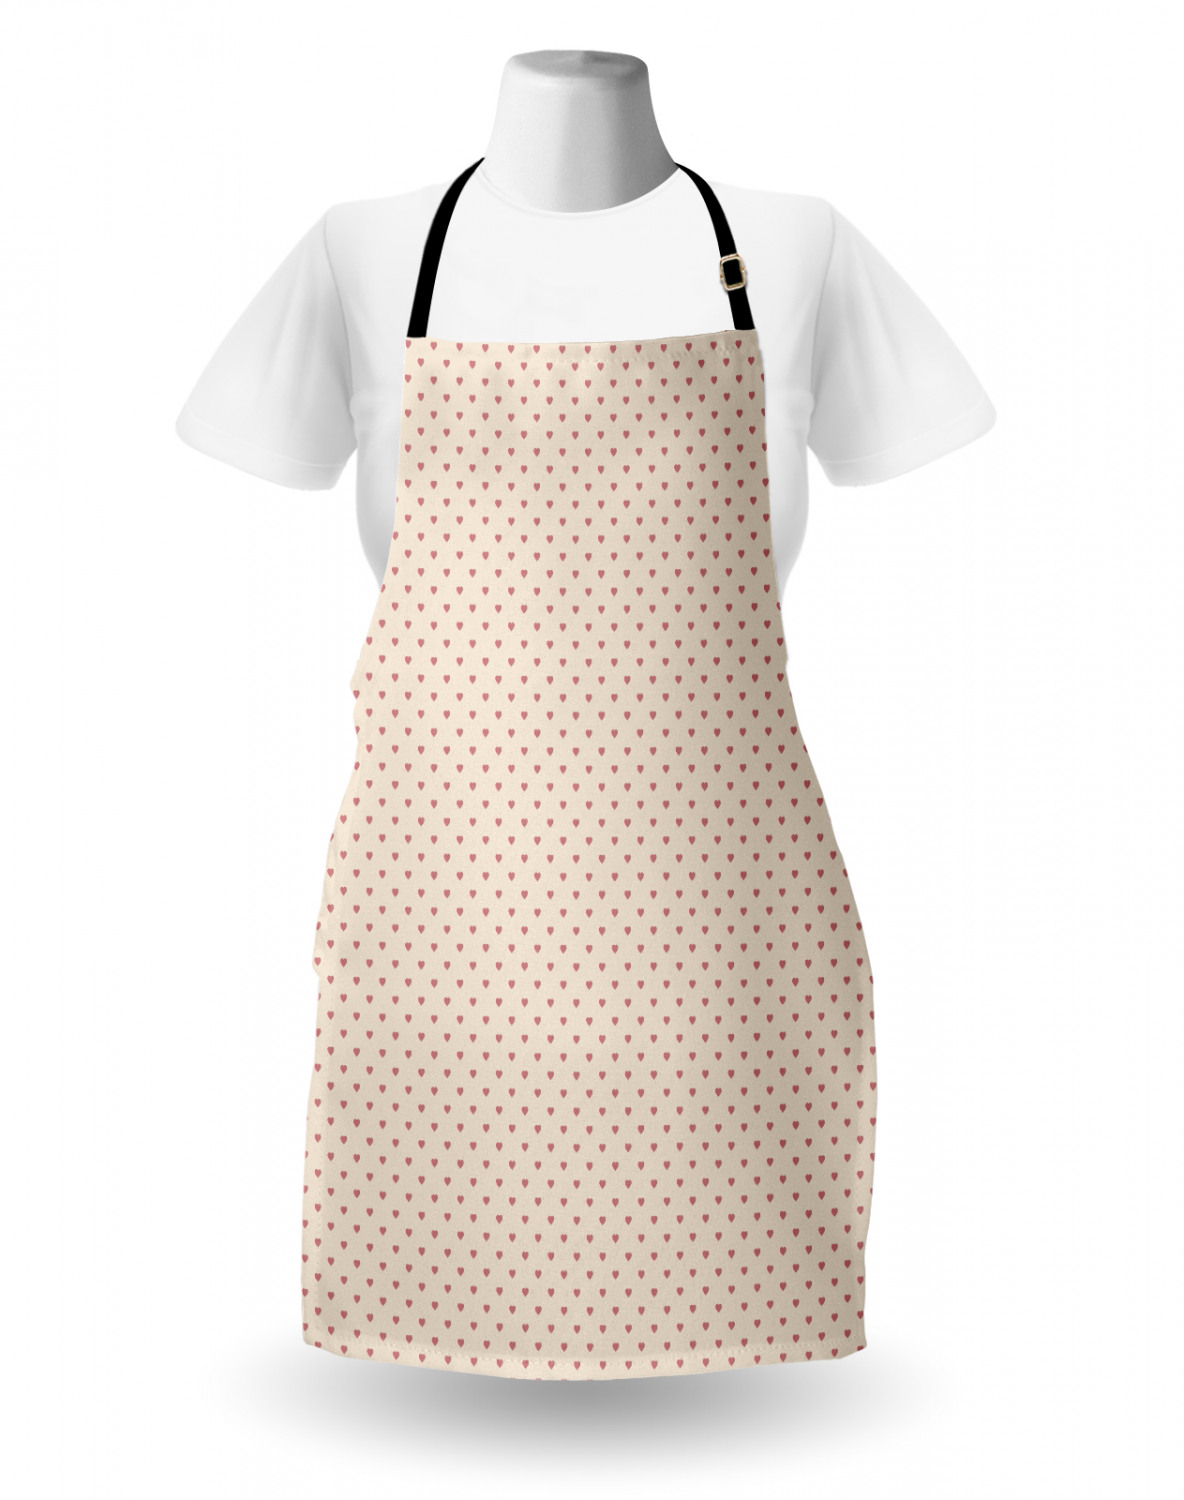 Details about   Ambesonne Apron with Adjustable Neck for Gardening Cooking No Fading 